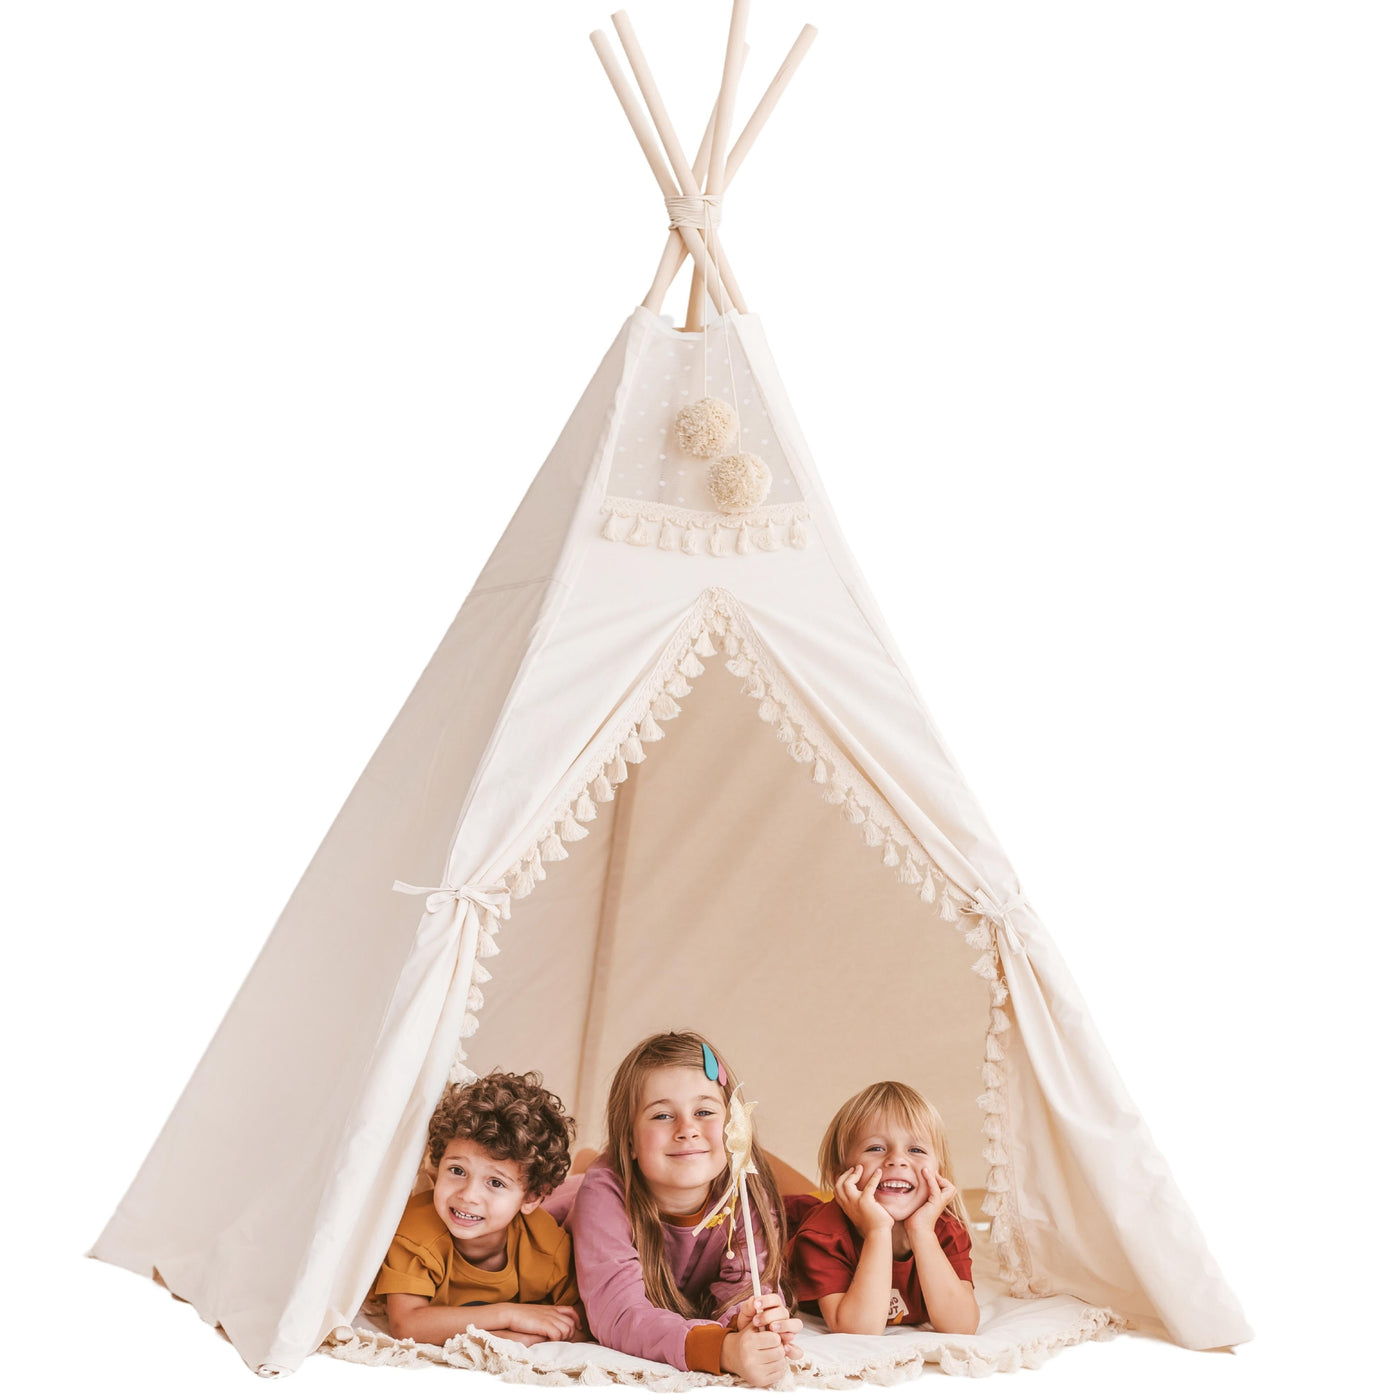 Minicamp Extra Large Indoor Teepee Tent With Tassels Decor In Boho Style-minicamp-Yes Bebe